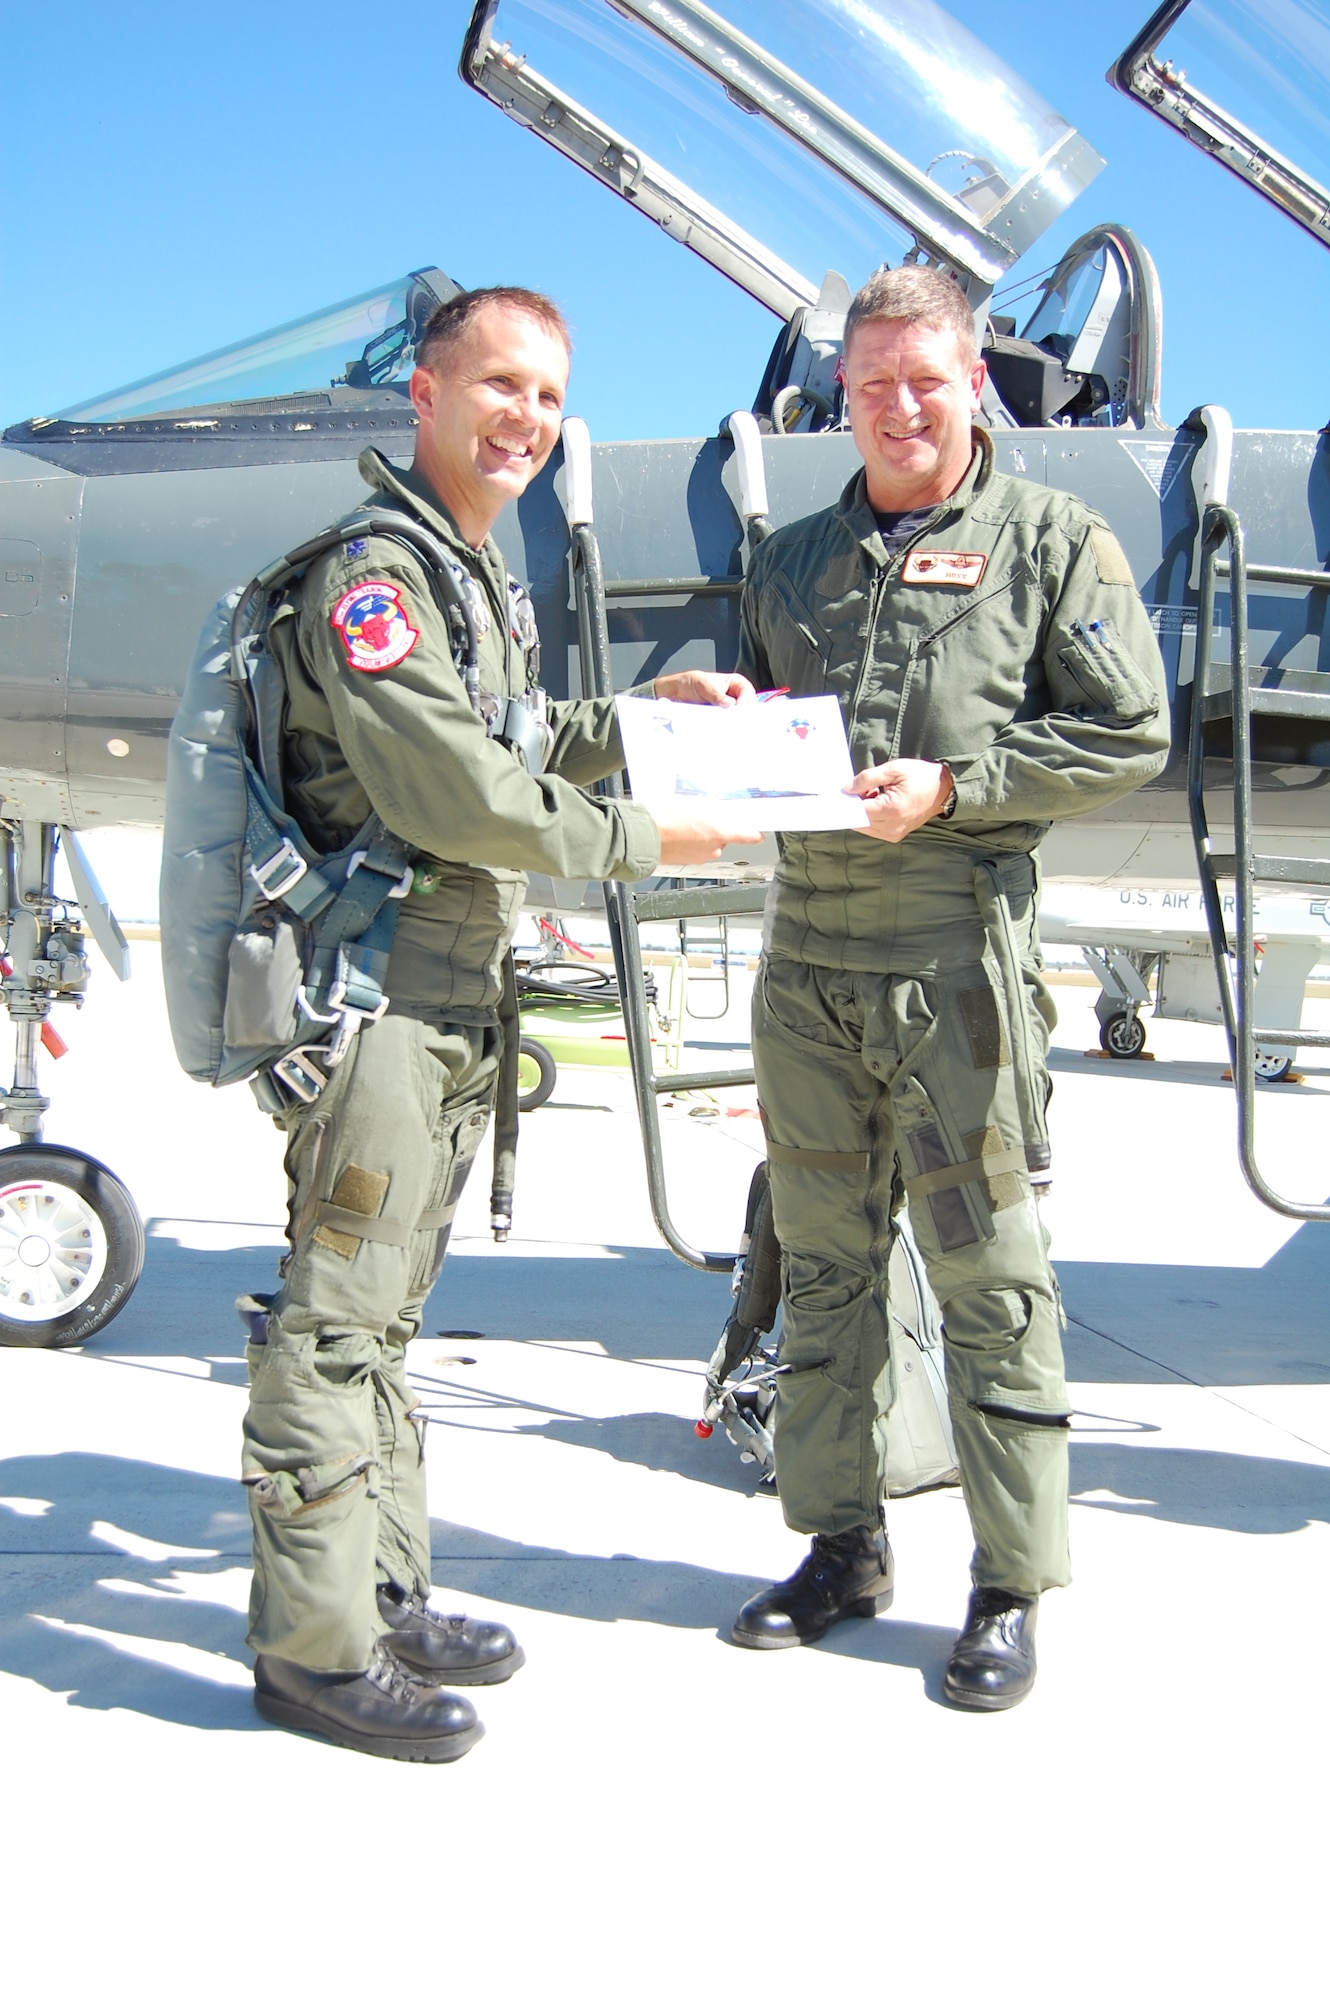 LAUGHLIN AIR FORCE BASE, Texas – Vice wing commander Col. Laro Clark (right) receives a certificate documenting his 2,000th T-38 flying hour from Lt. Col. Dean Lee who commands the 87th Flying Training Squadron's Red Bulls.  The 87th is responsible for conducting the final phase of specialized undergraduate pilot training for students who will continue on in the fighter/bomber track.  In 2007, Laughlin graduated 346 of the world's best trained pilots.  Colonel Clark adds this personal flying milestone to many others including service on the East Coast F-15 Aerial Demonstration Team, rating as a Euro-NATO Joint Jet Pilot and 220 combat hours in the F-15. He will deploy in January 2008 in support of the Global War on Terror. (U.S. Air Force Photo/Airman Sara Csurilla)